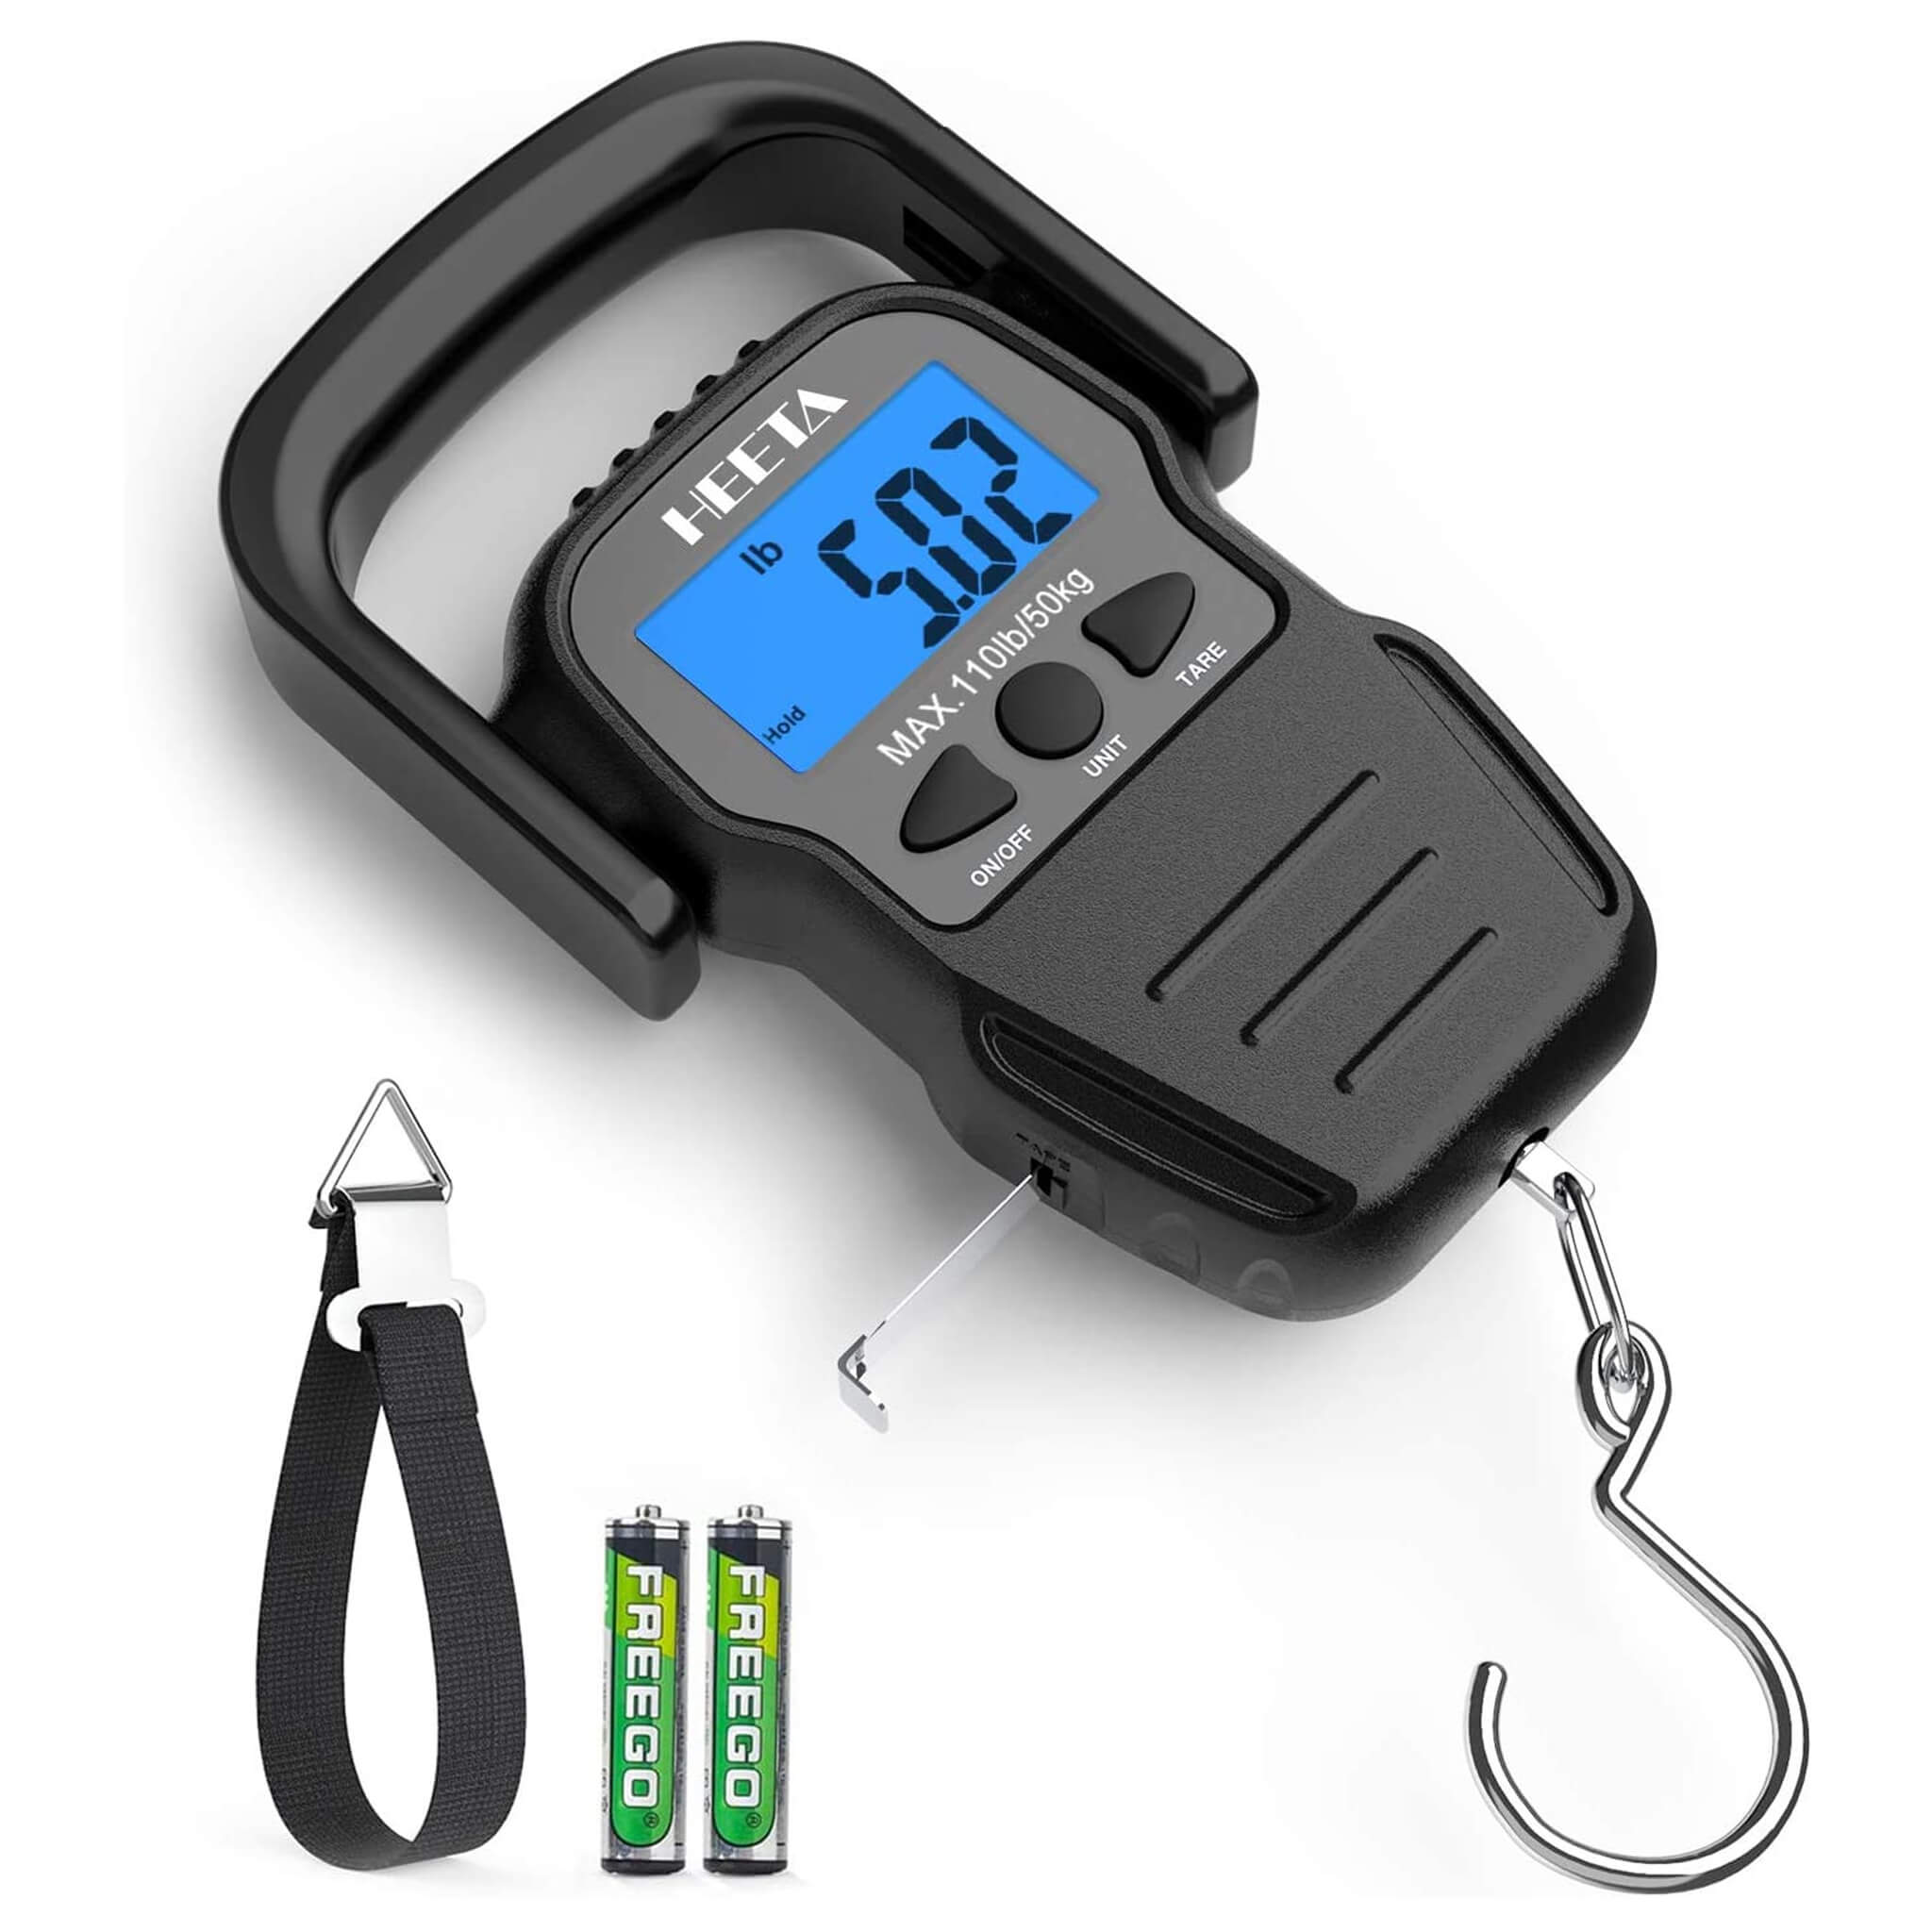 LCD Display Luggage Scale Digital Hanging Fishing Scale for Fishing  Shopping